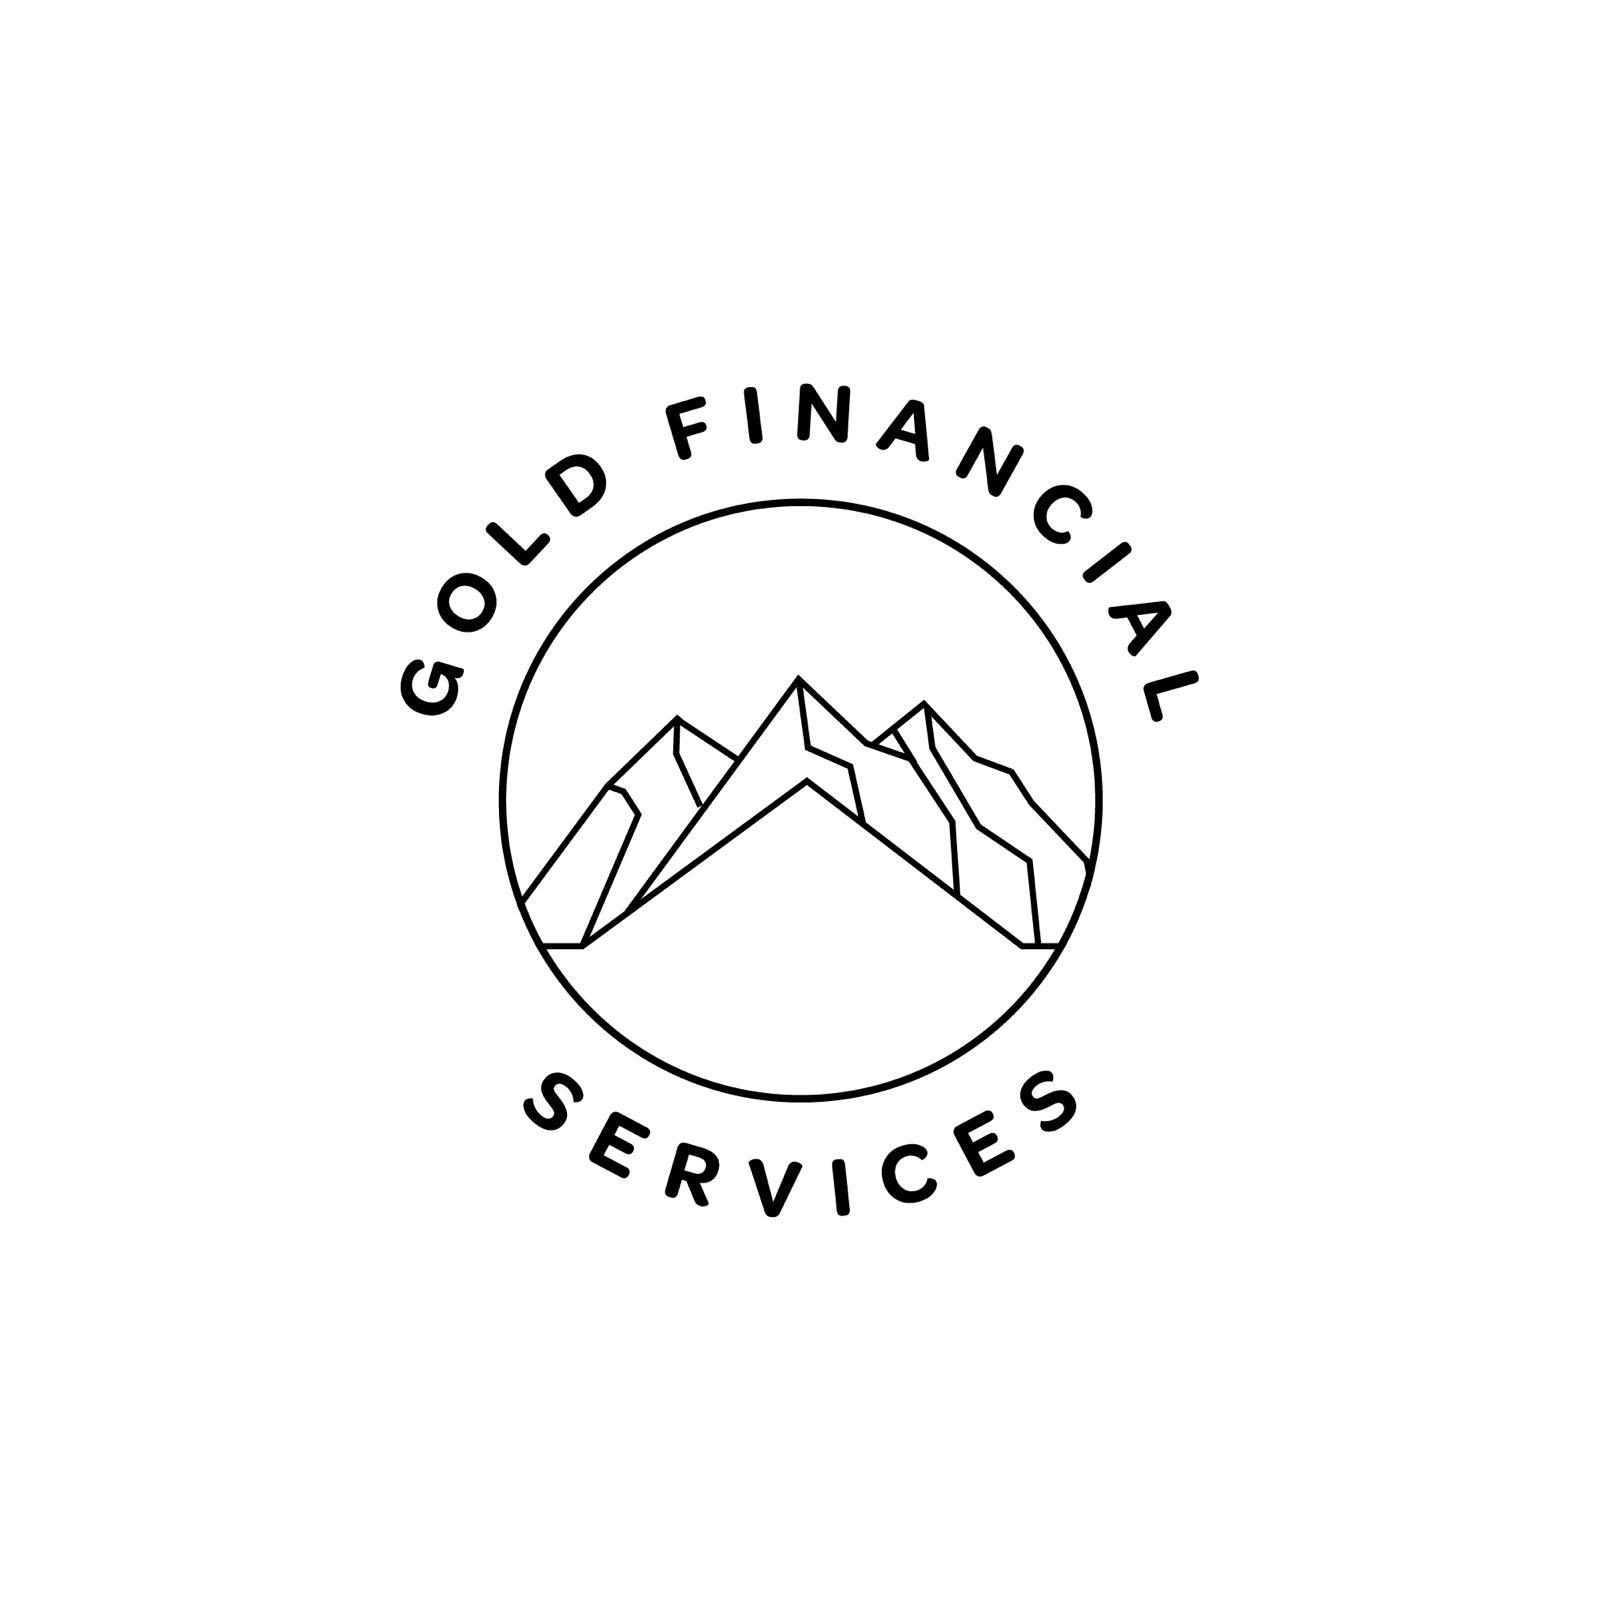 Gold Finance Services